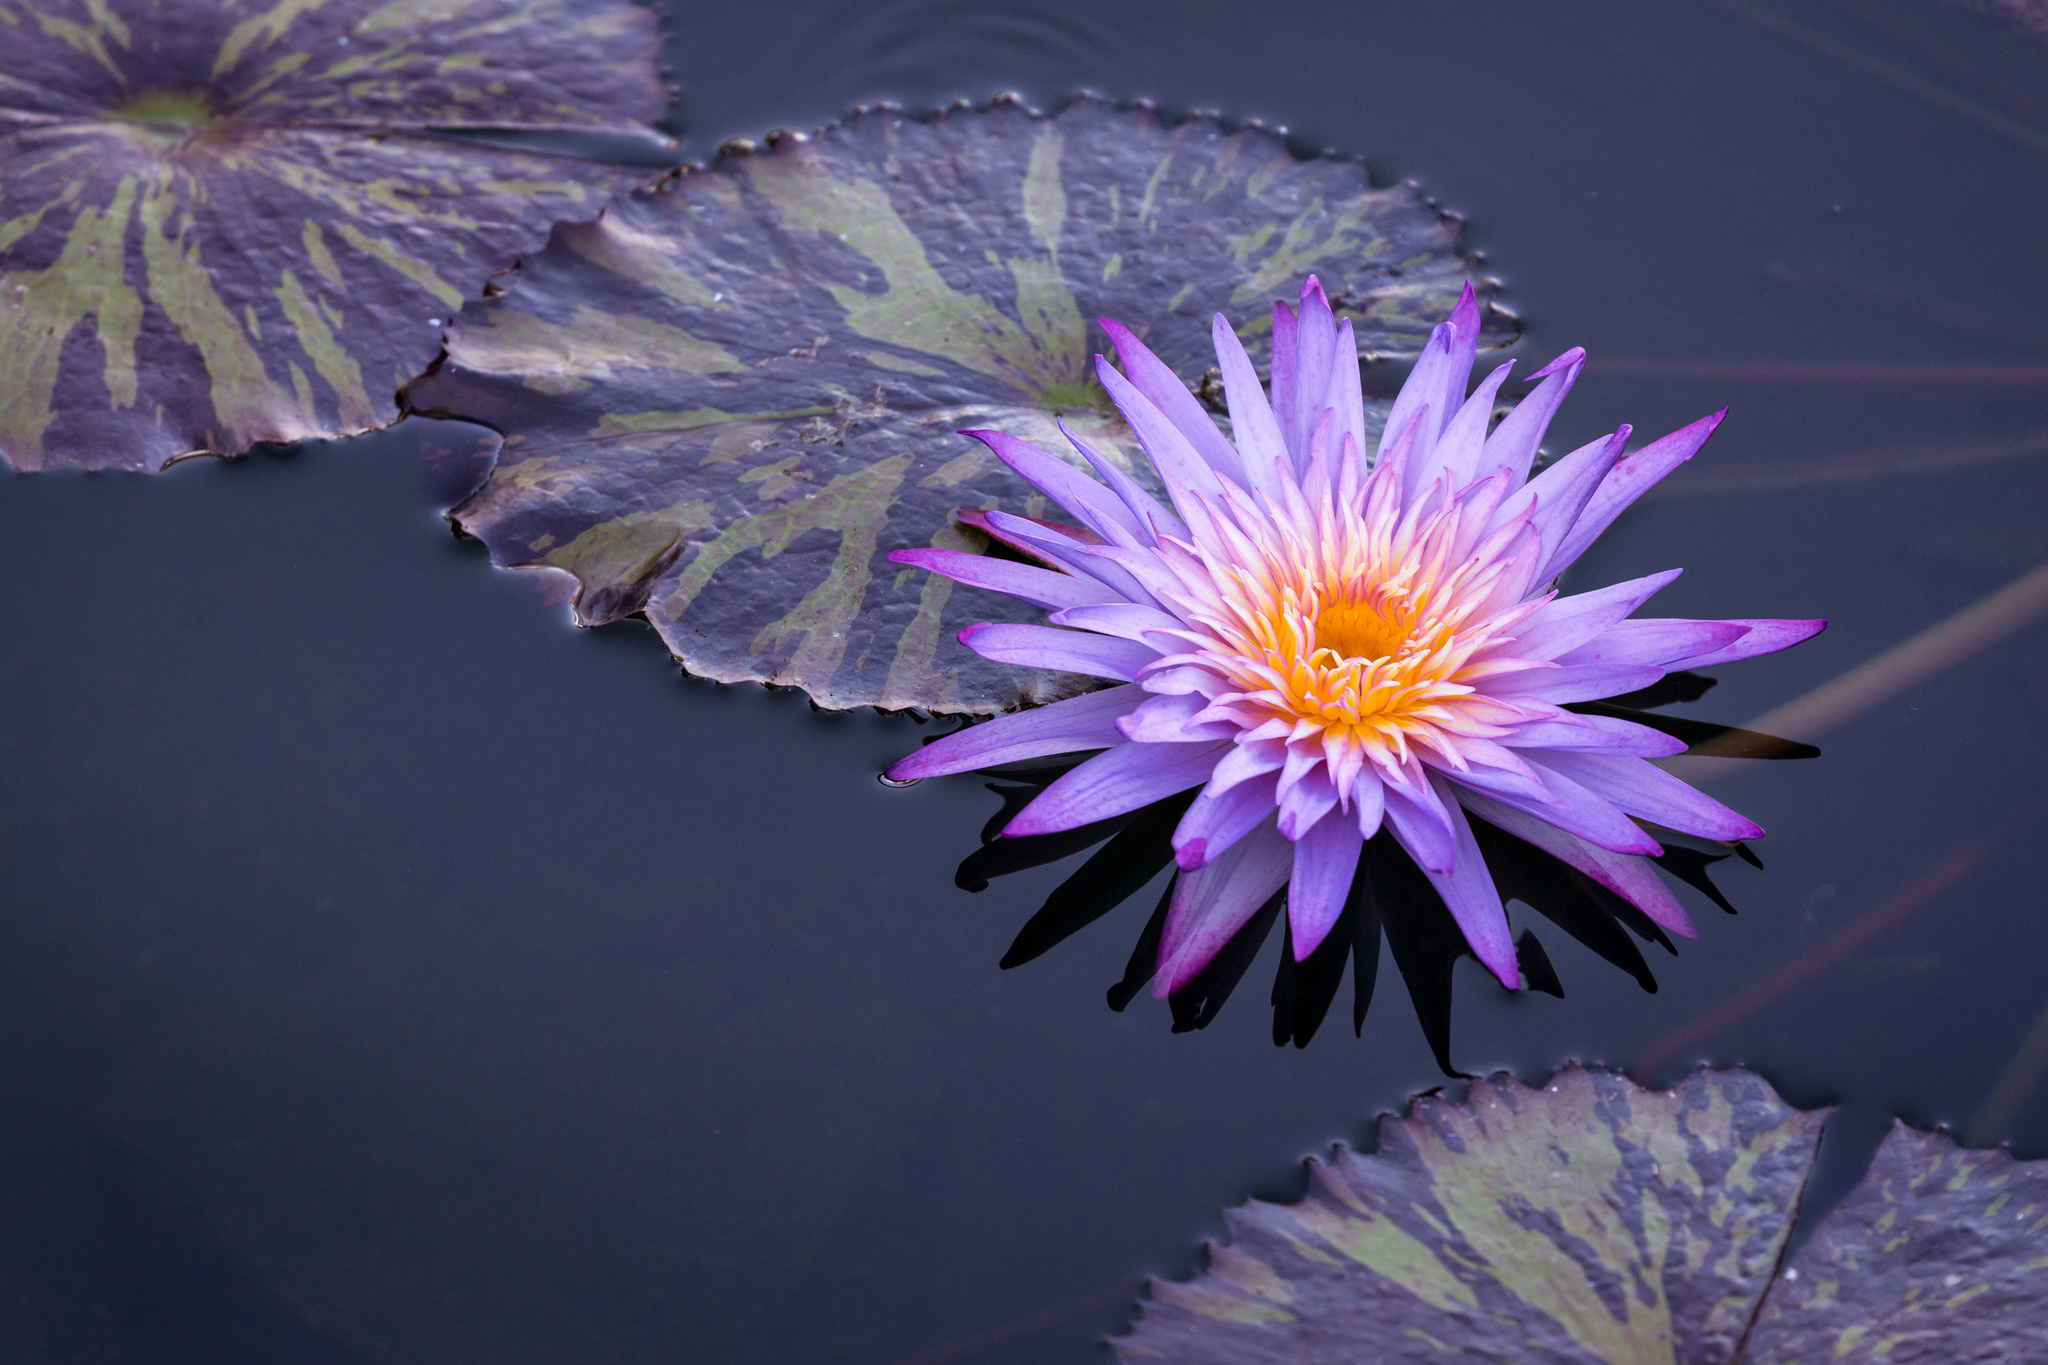 Earth Flower Lily Pad Purple Flower Water Lily 2048x1365